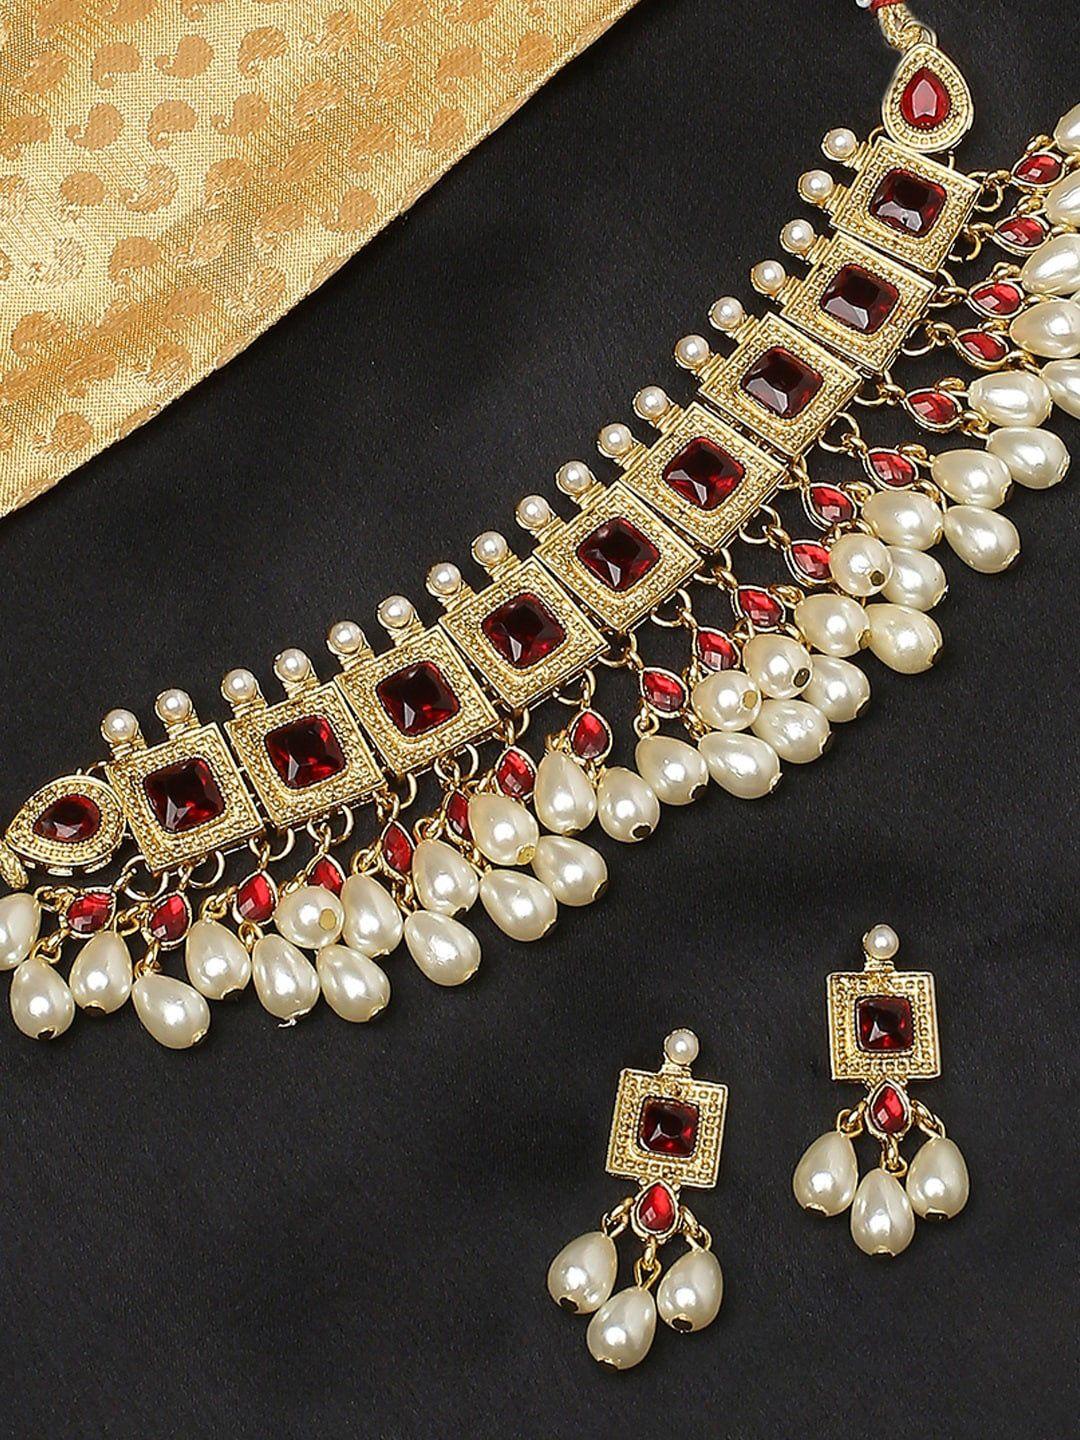 oomph kundan stones & pearls ethnic choker necklace set with drop earrings